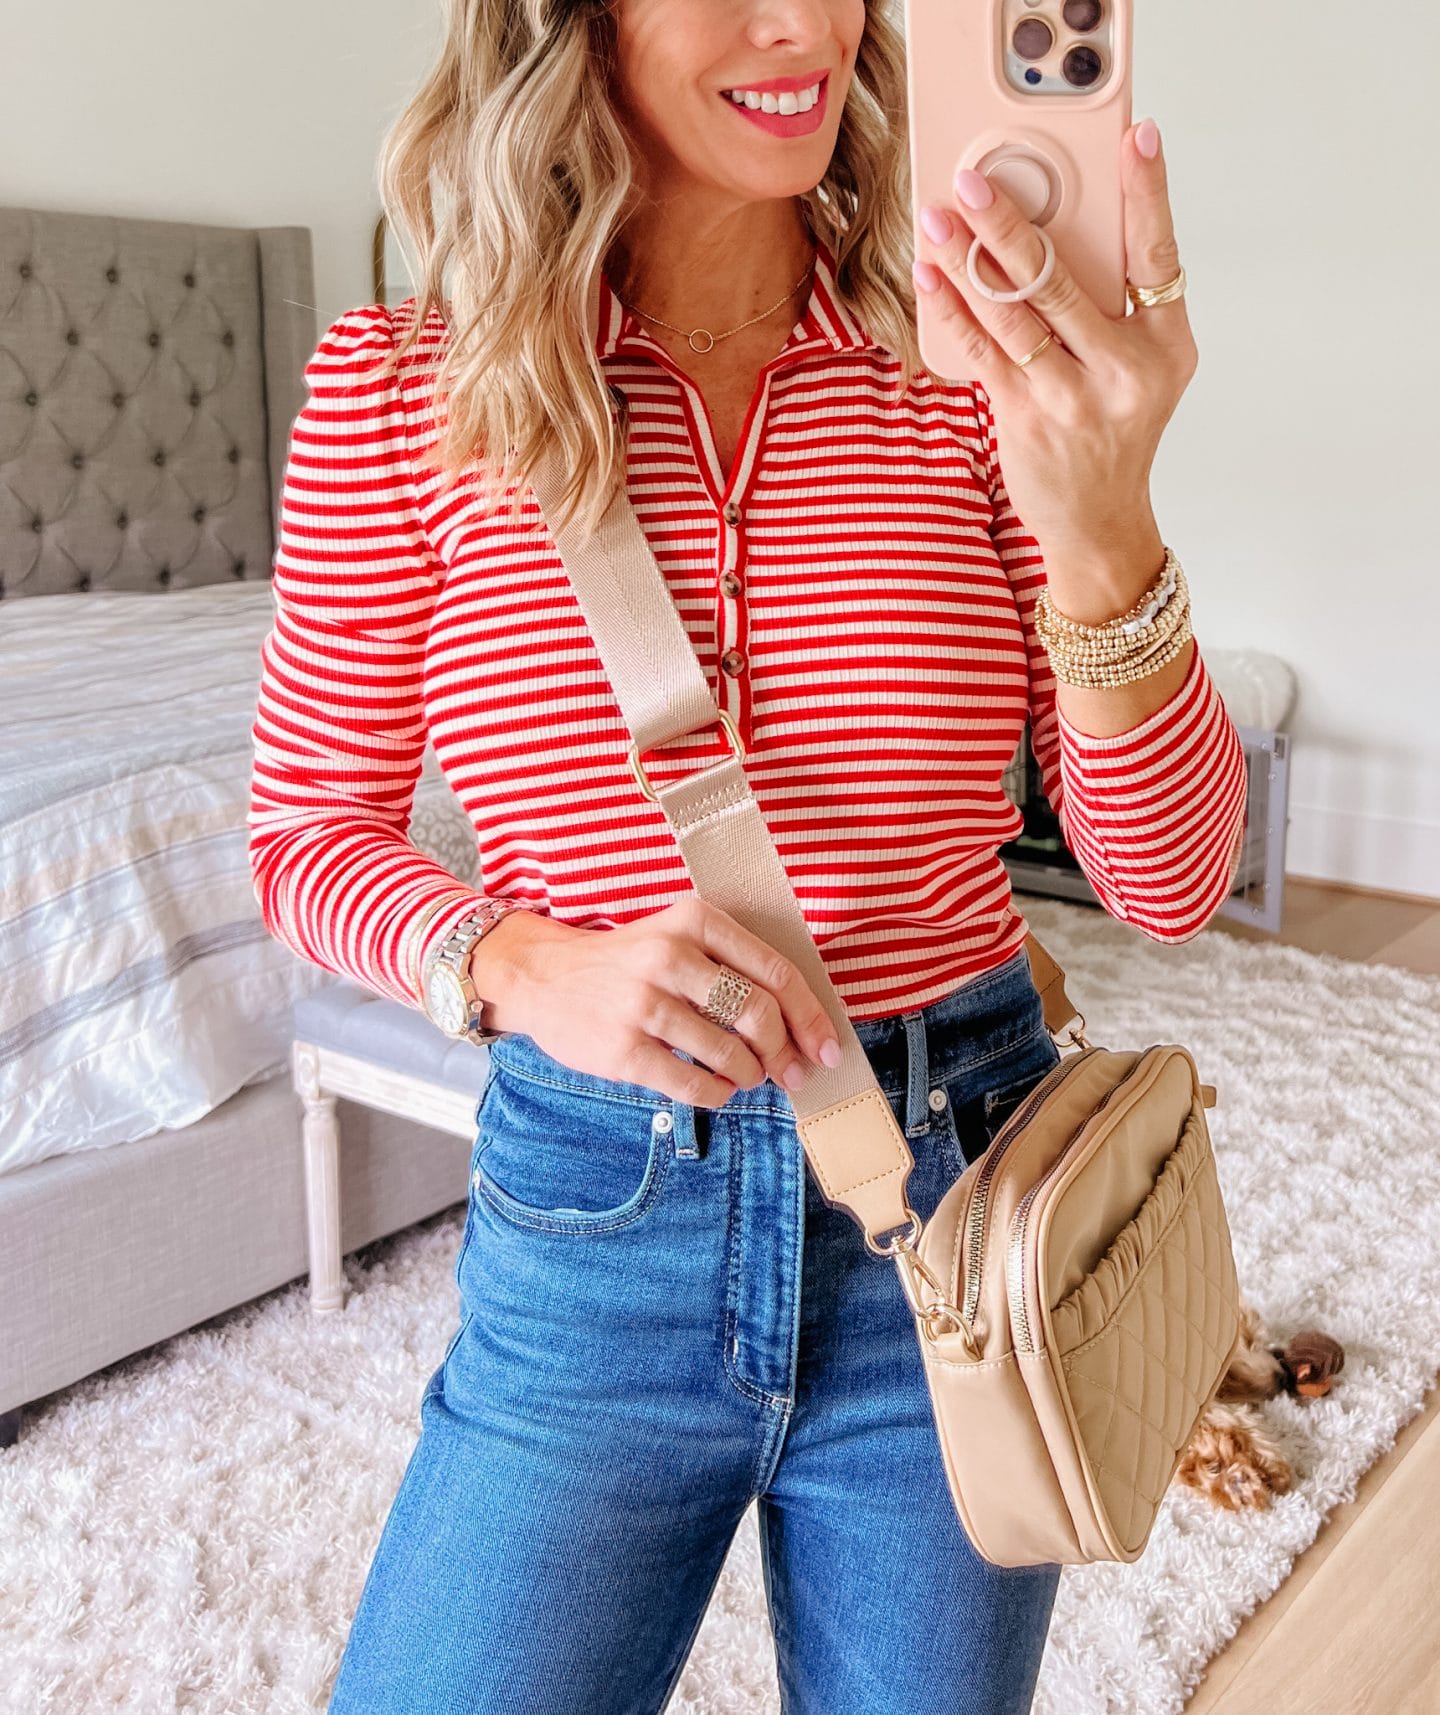 Striped Top, jeans, Wedges, Crossbody 